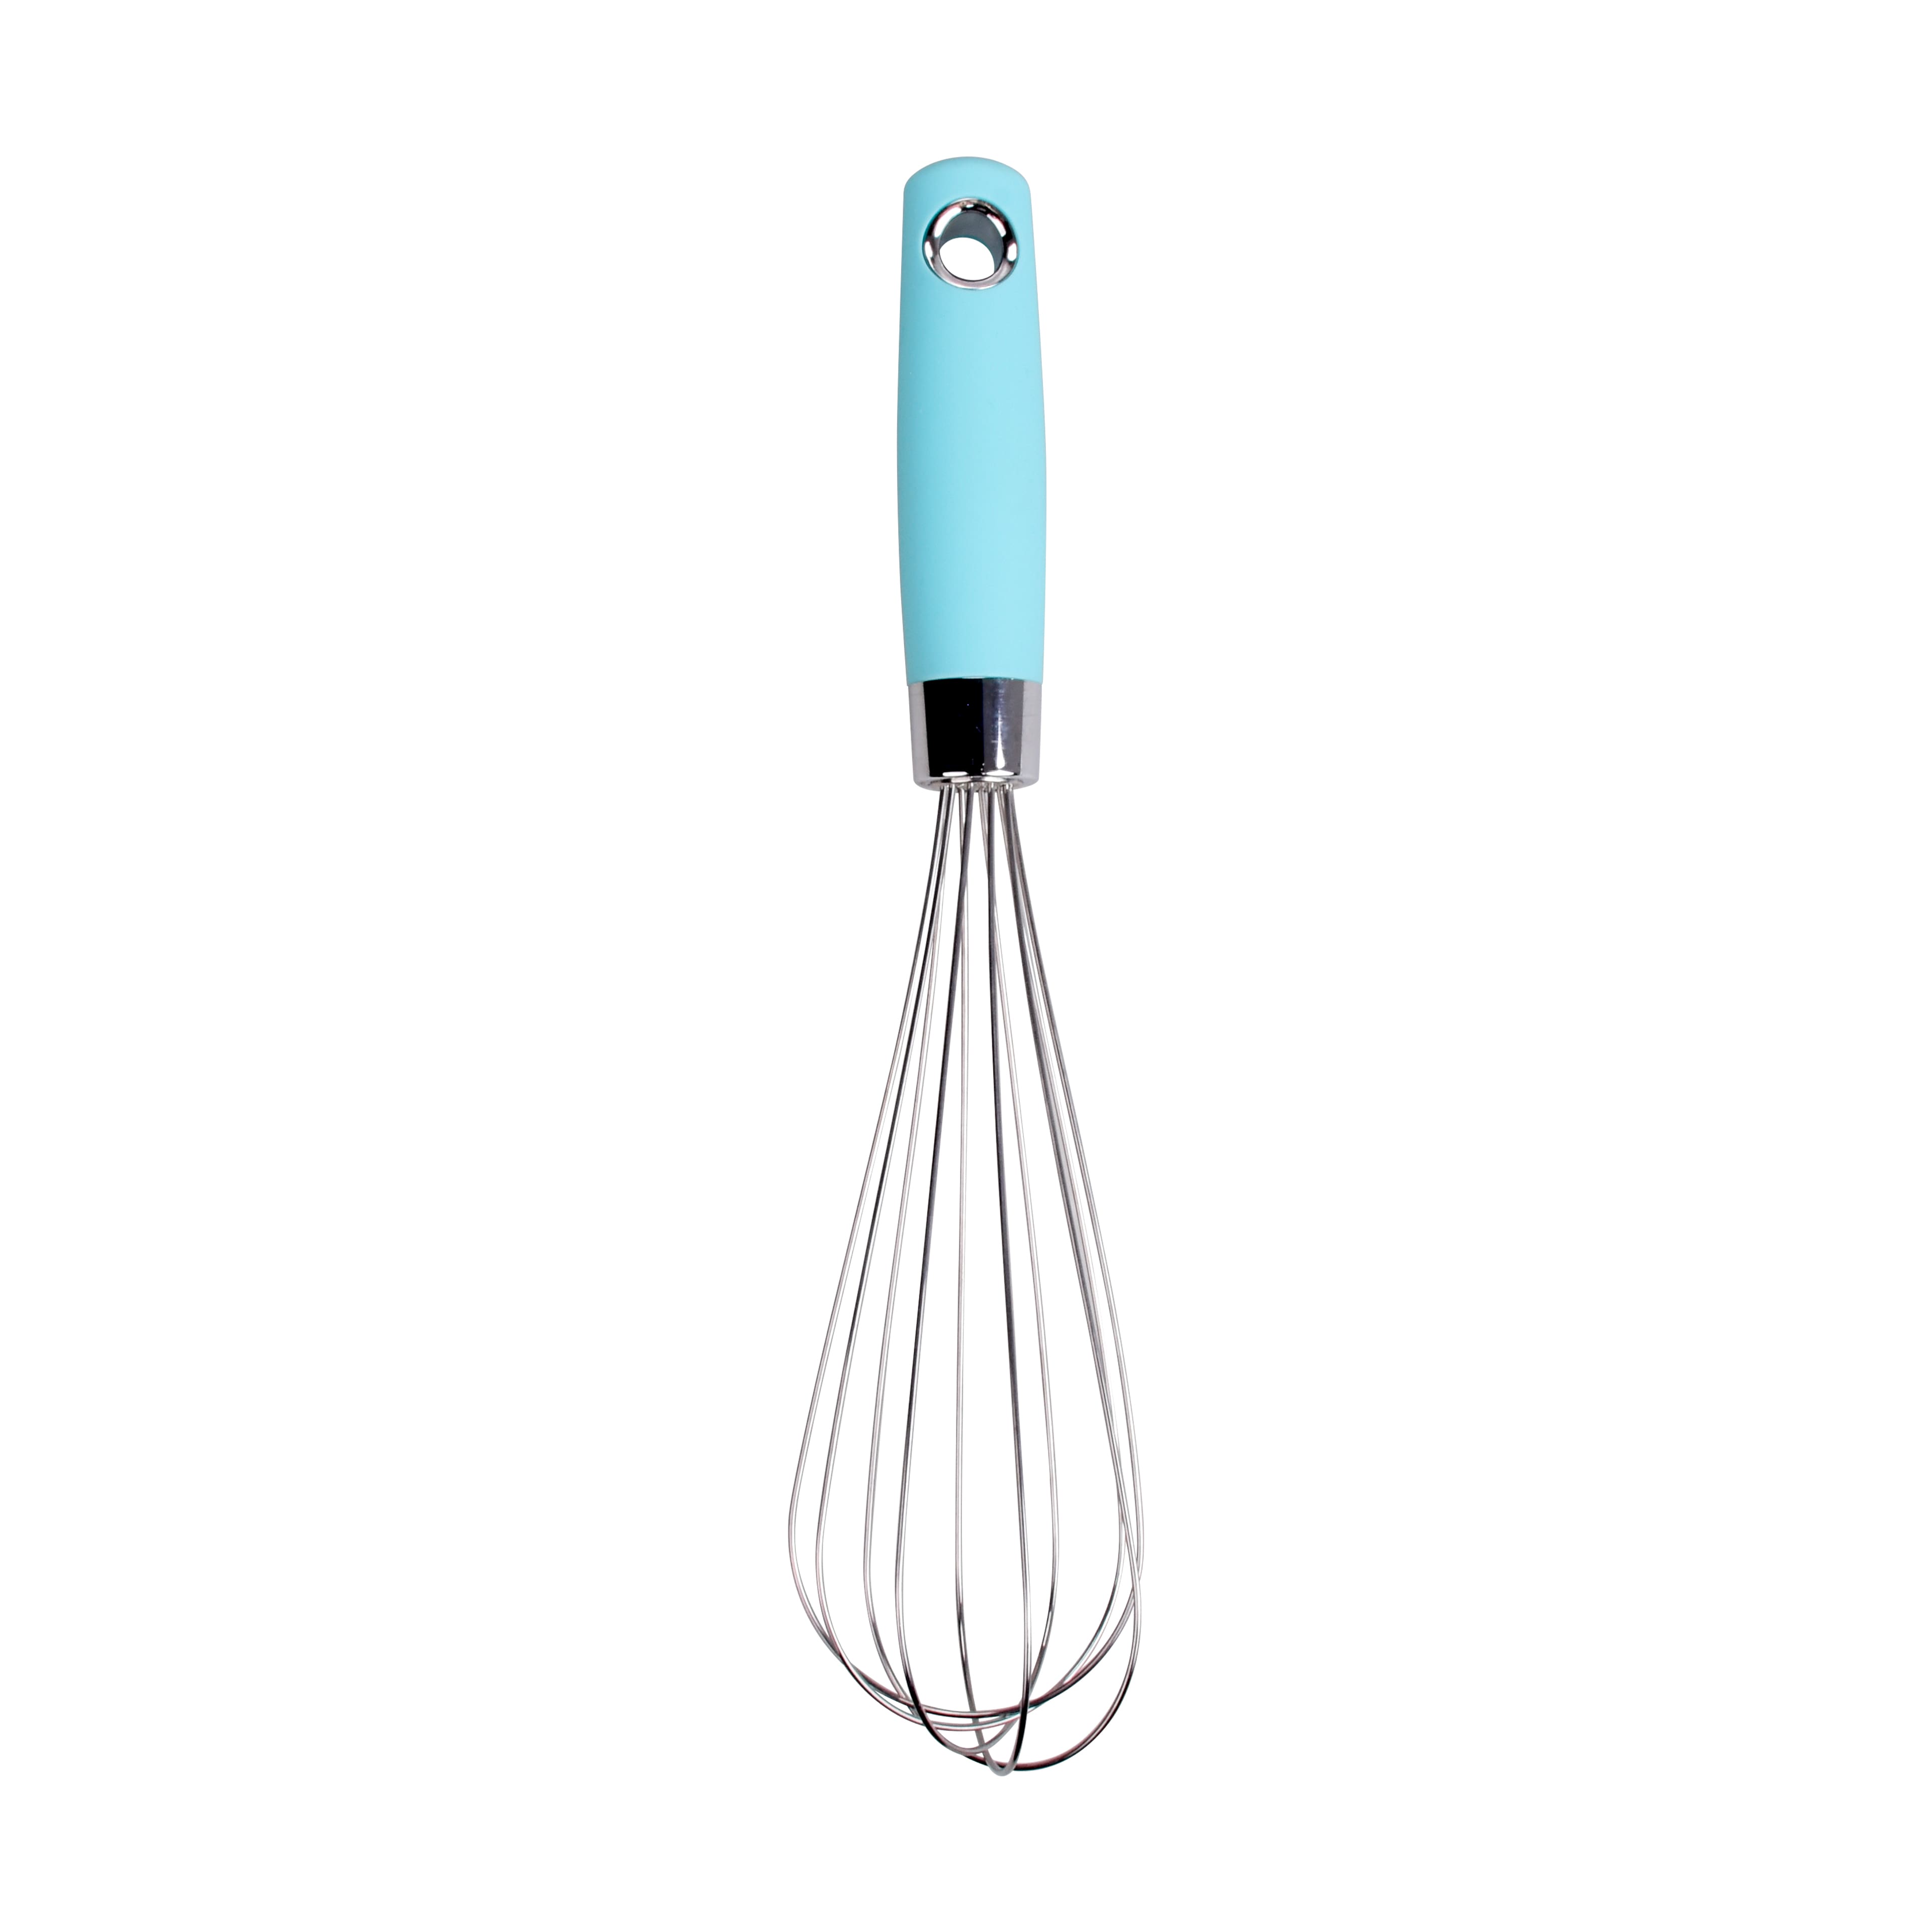 Chef Craft 3pc Chrome Plated Steel Mini Whisk Set - Great for Sauces,  Dressing, Eggs and More